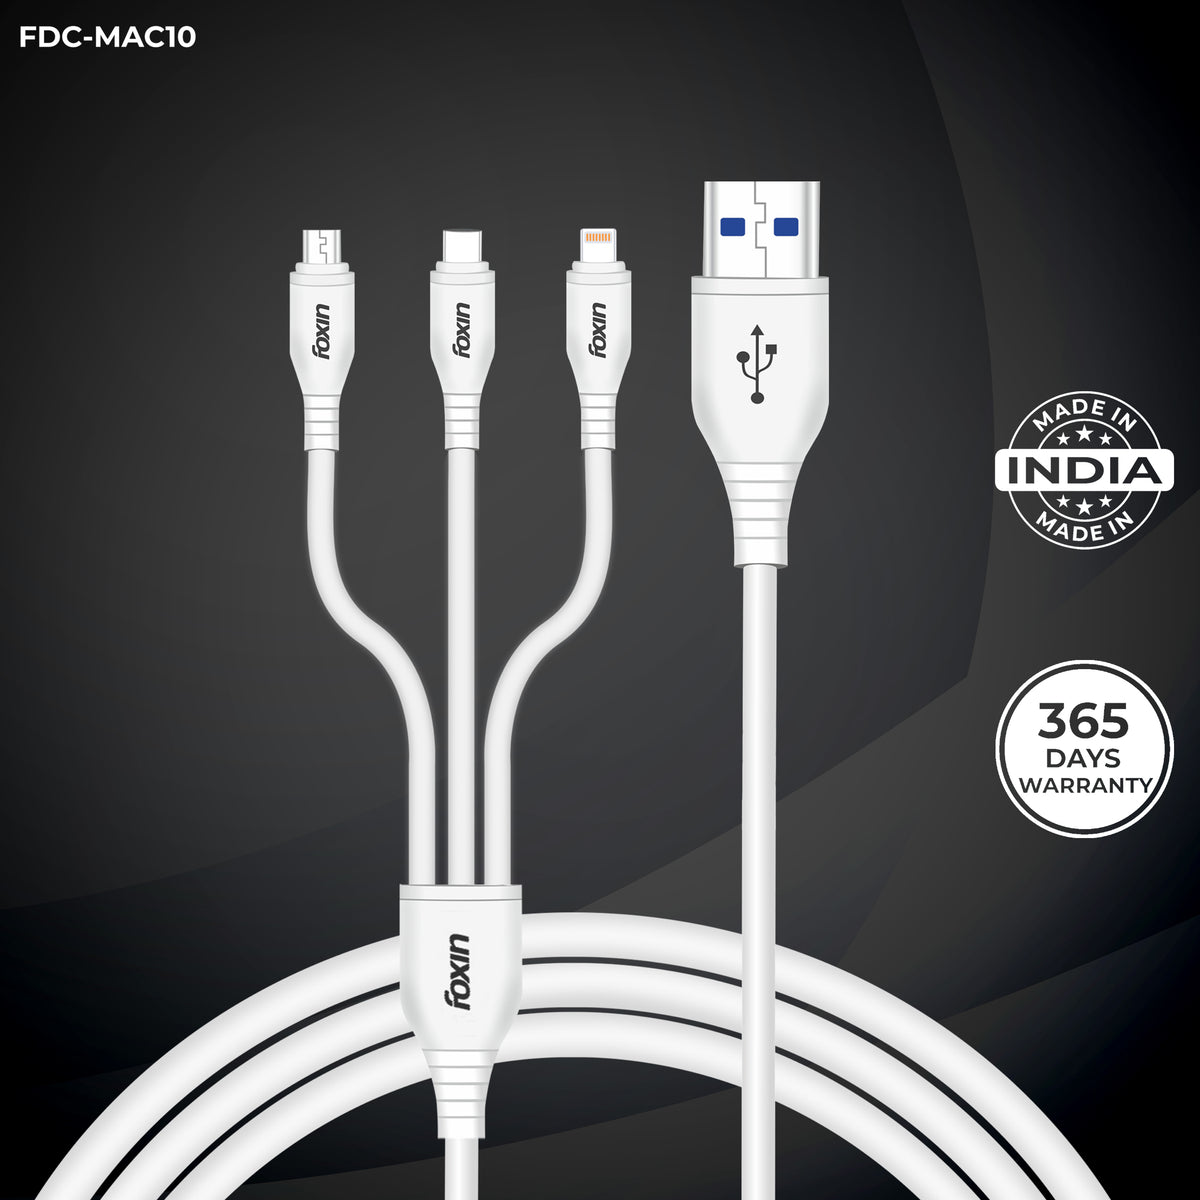 Foxin MAC10 3 in 1 Parallel Charging Aluminium Alloy Metal PVC Cable with 2.4A Fast Charging and 480 Mbps Data Transfer Rate, 1.2 Meters long, High Speed Smart Charging Cable, Compatible with IOS/Android, Micro and Type-C devices (White)